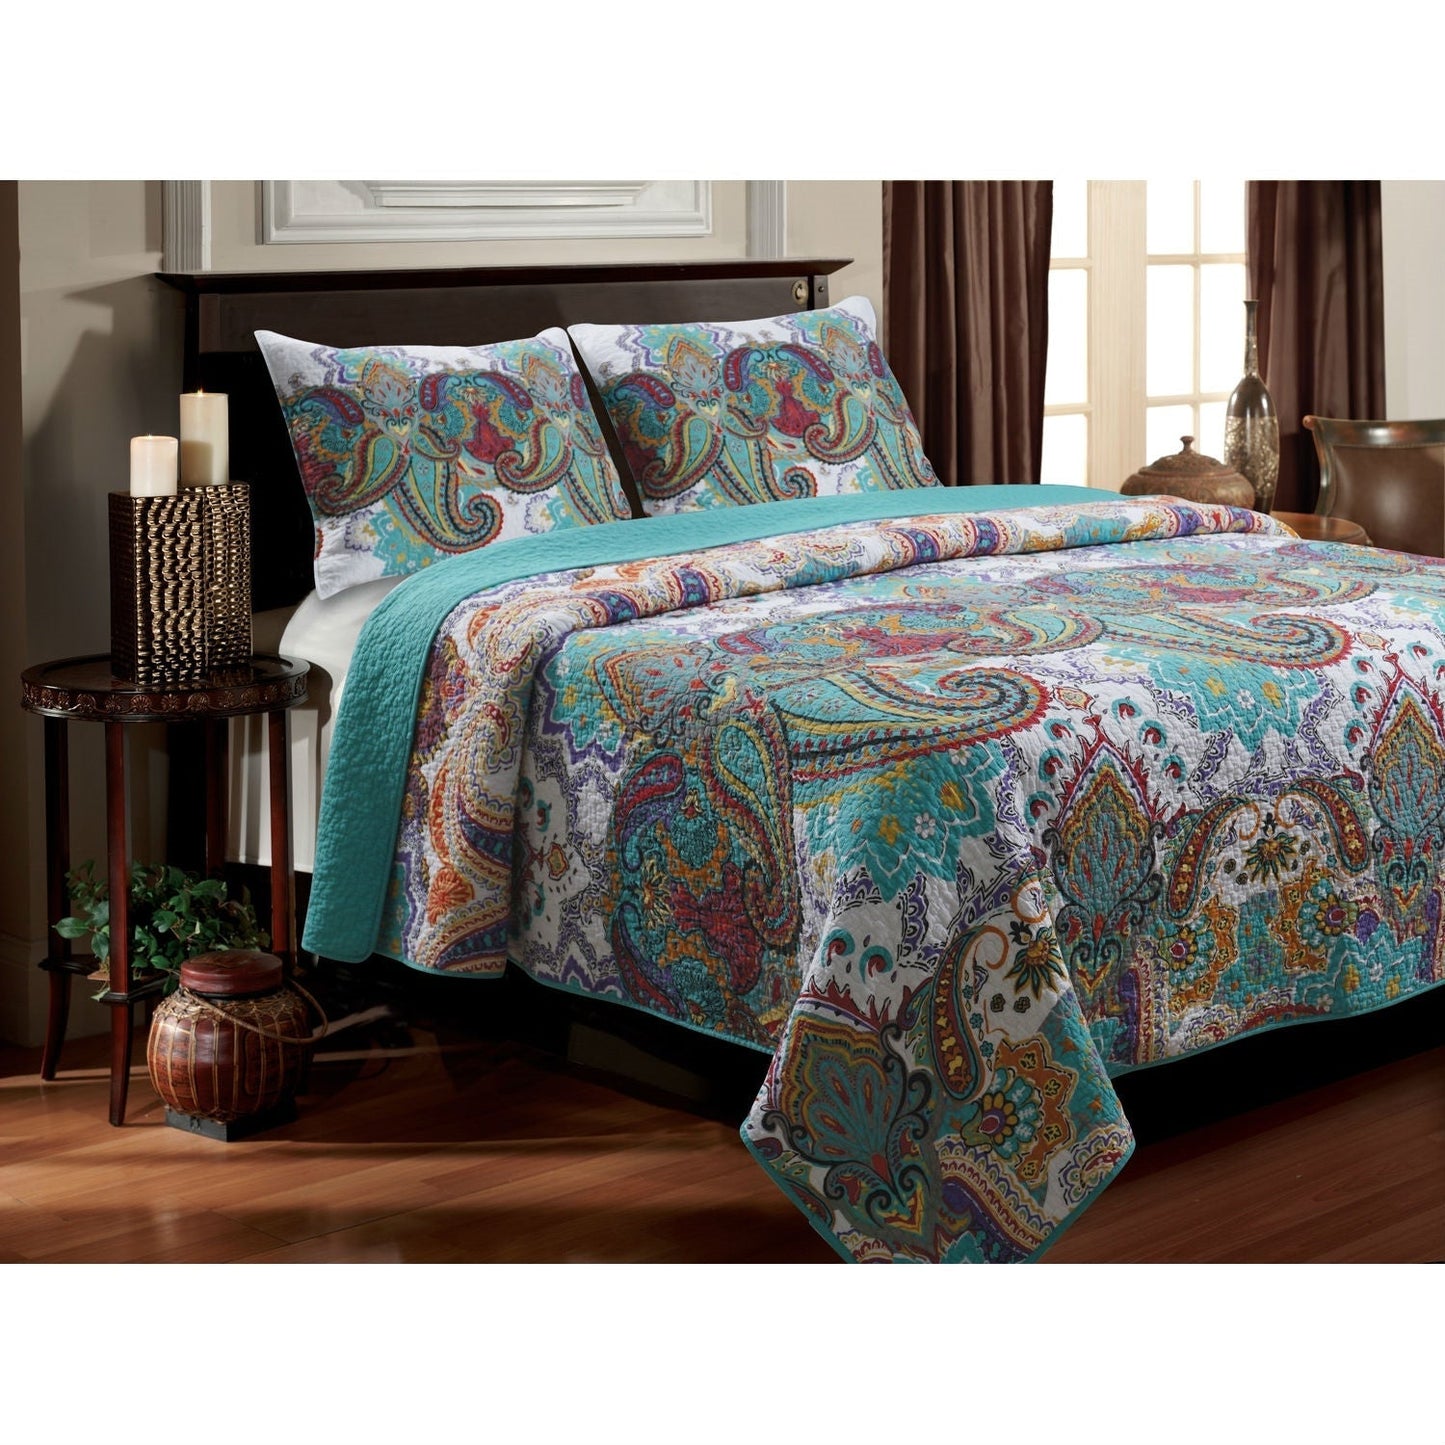 Bedroom > Quilts & Blankets - King Size 100-Percent Cotton Quilt Set In Teal Paisley Pattern - Preshrunk